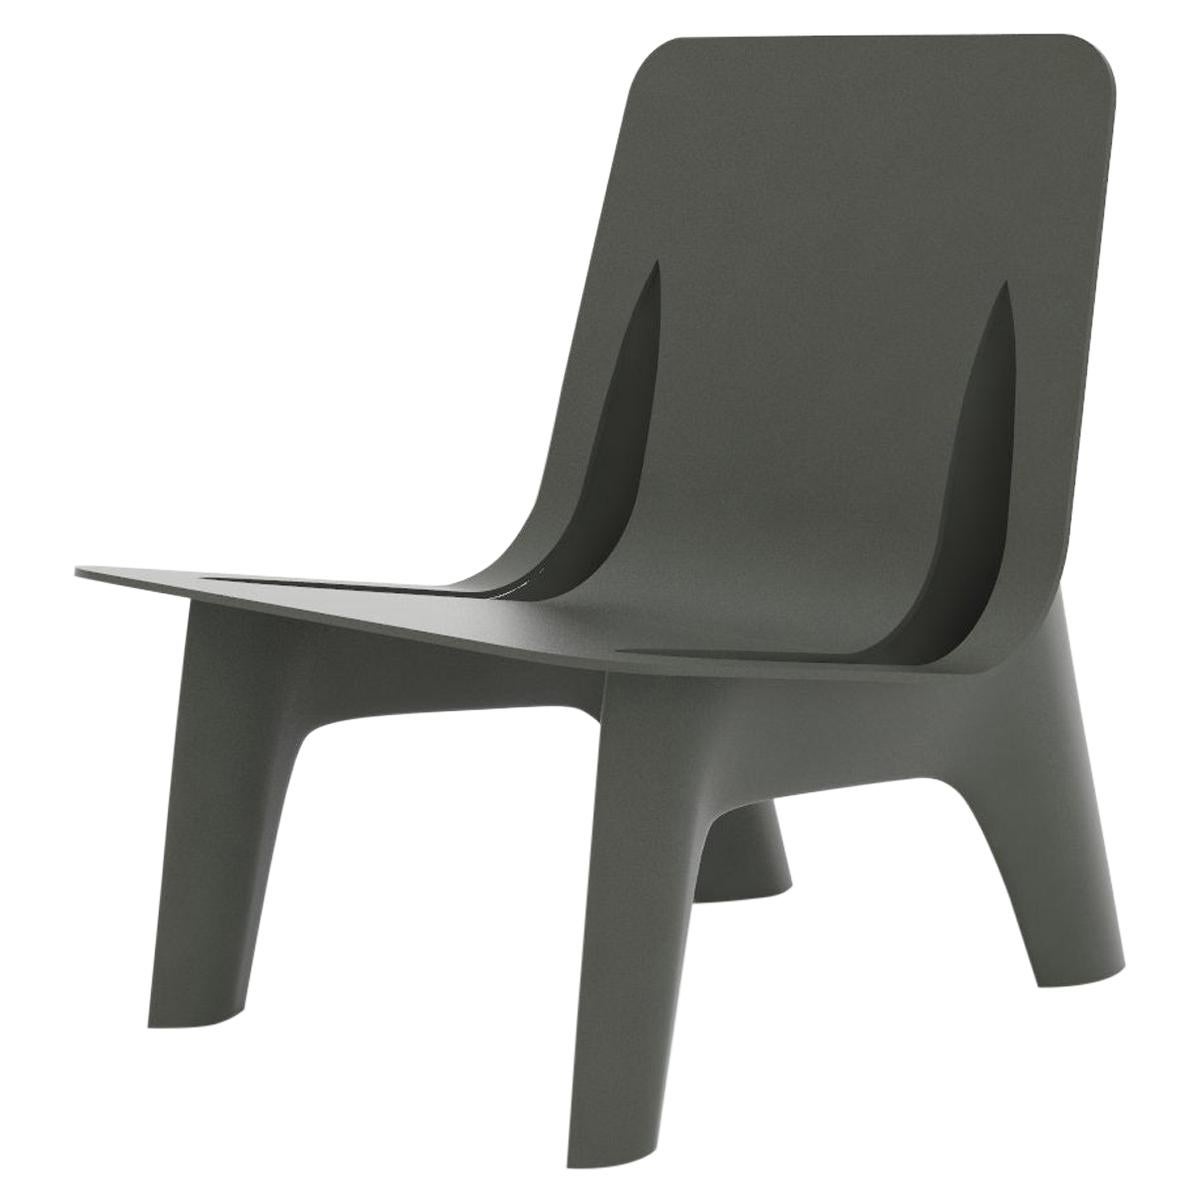 J-Chair Lounge Polished Umbra Grey Color Aluminum Seating by Zieta